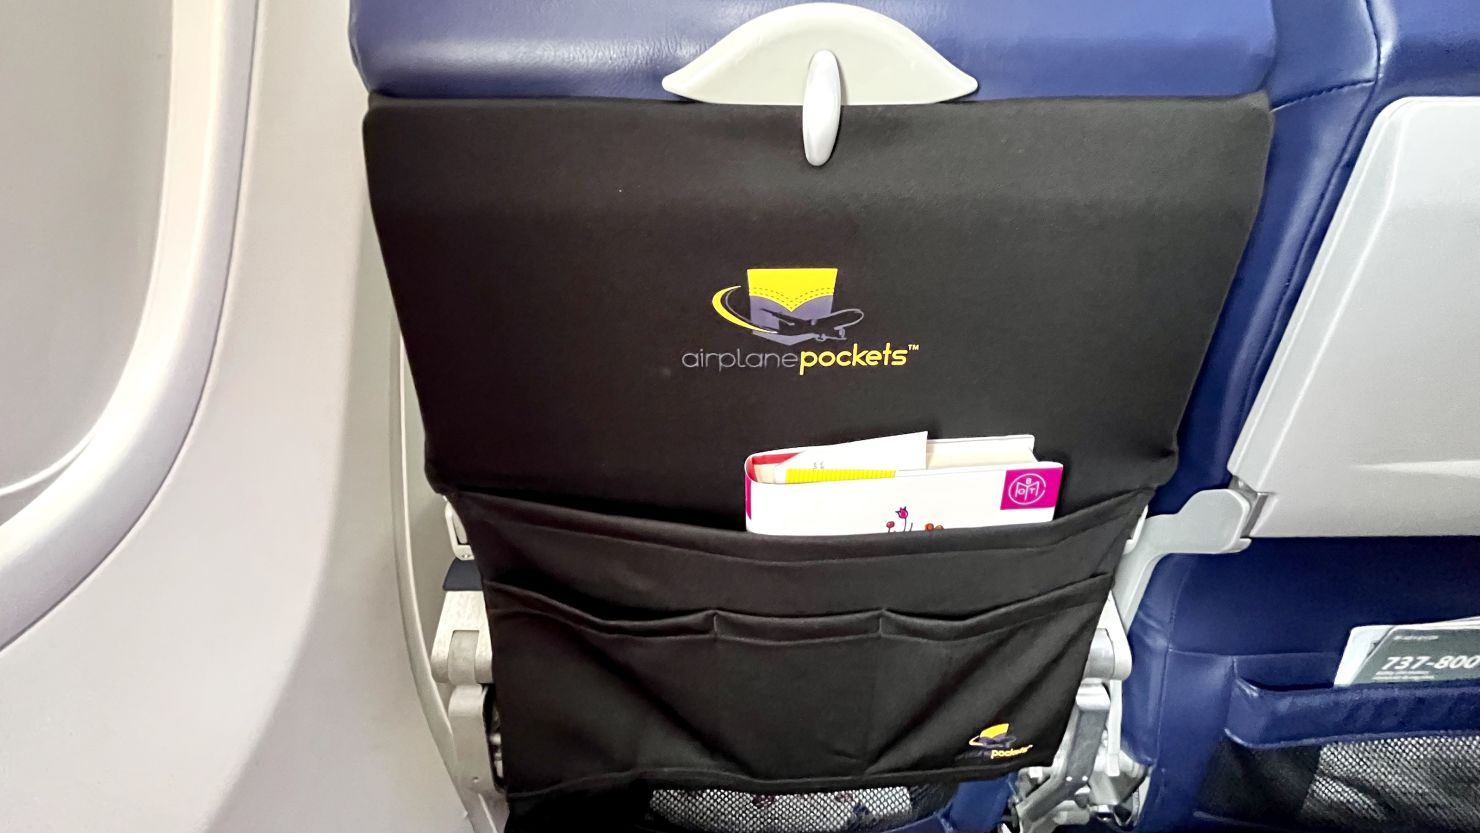 Airplane Pockets Airplane Tray Table Cover Review - Euro Travel